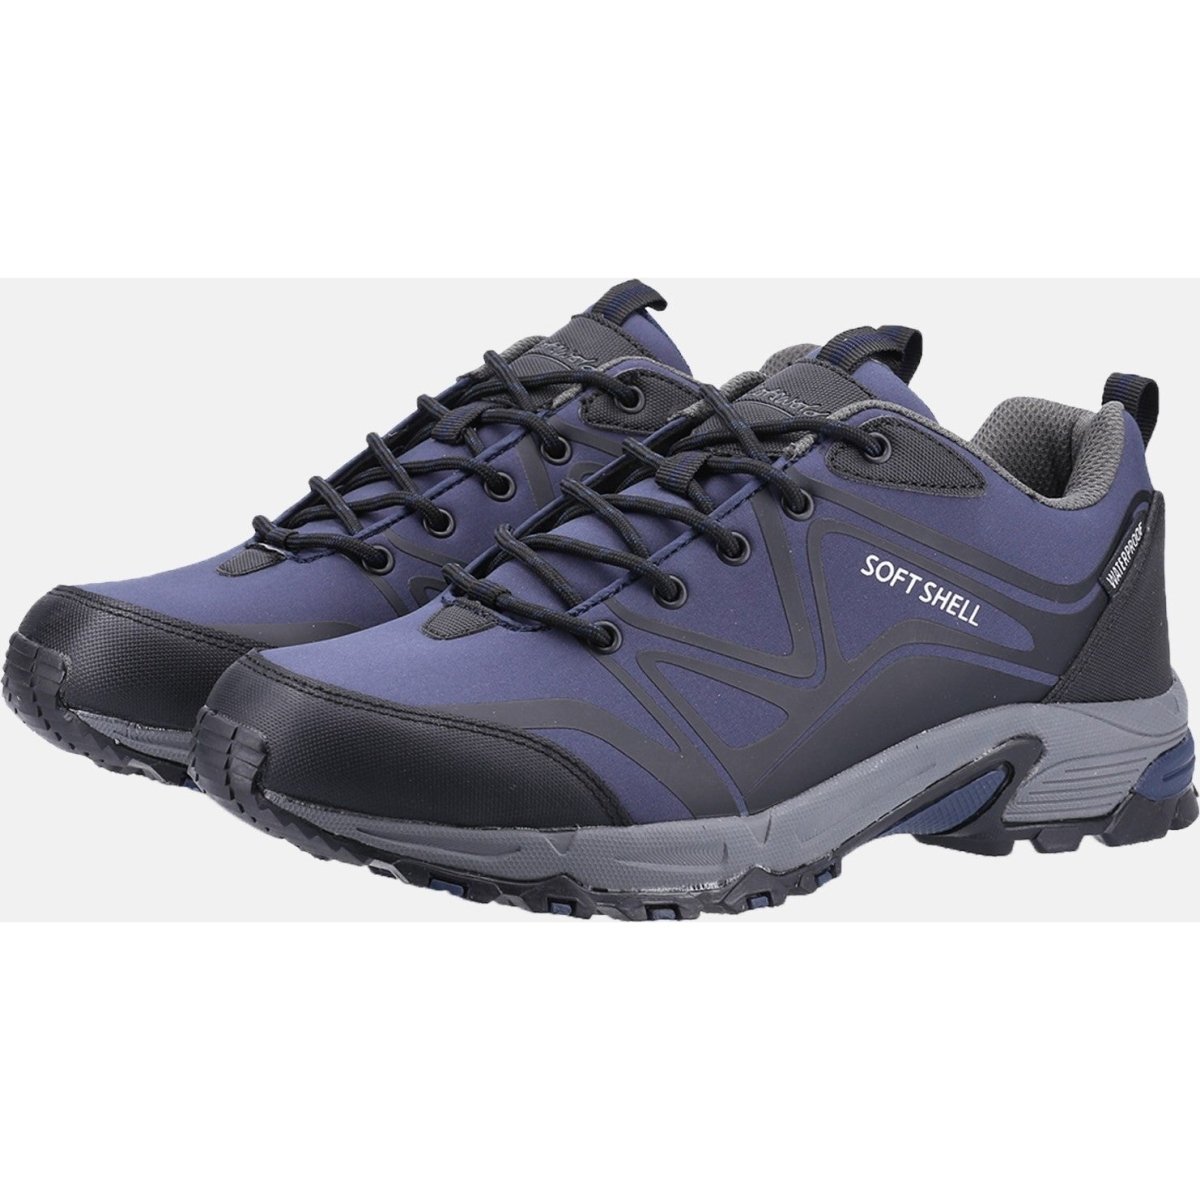 Cotswold Abbeydale Low Mens Walking Hiking Shoes - Shoe Store Direct